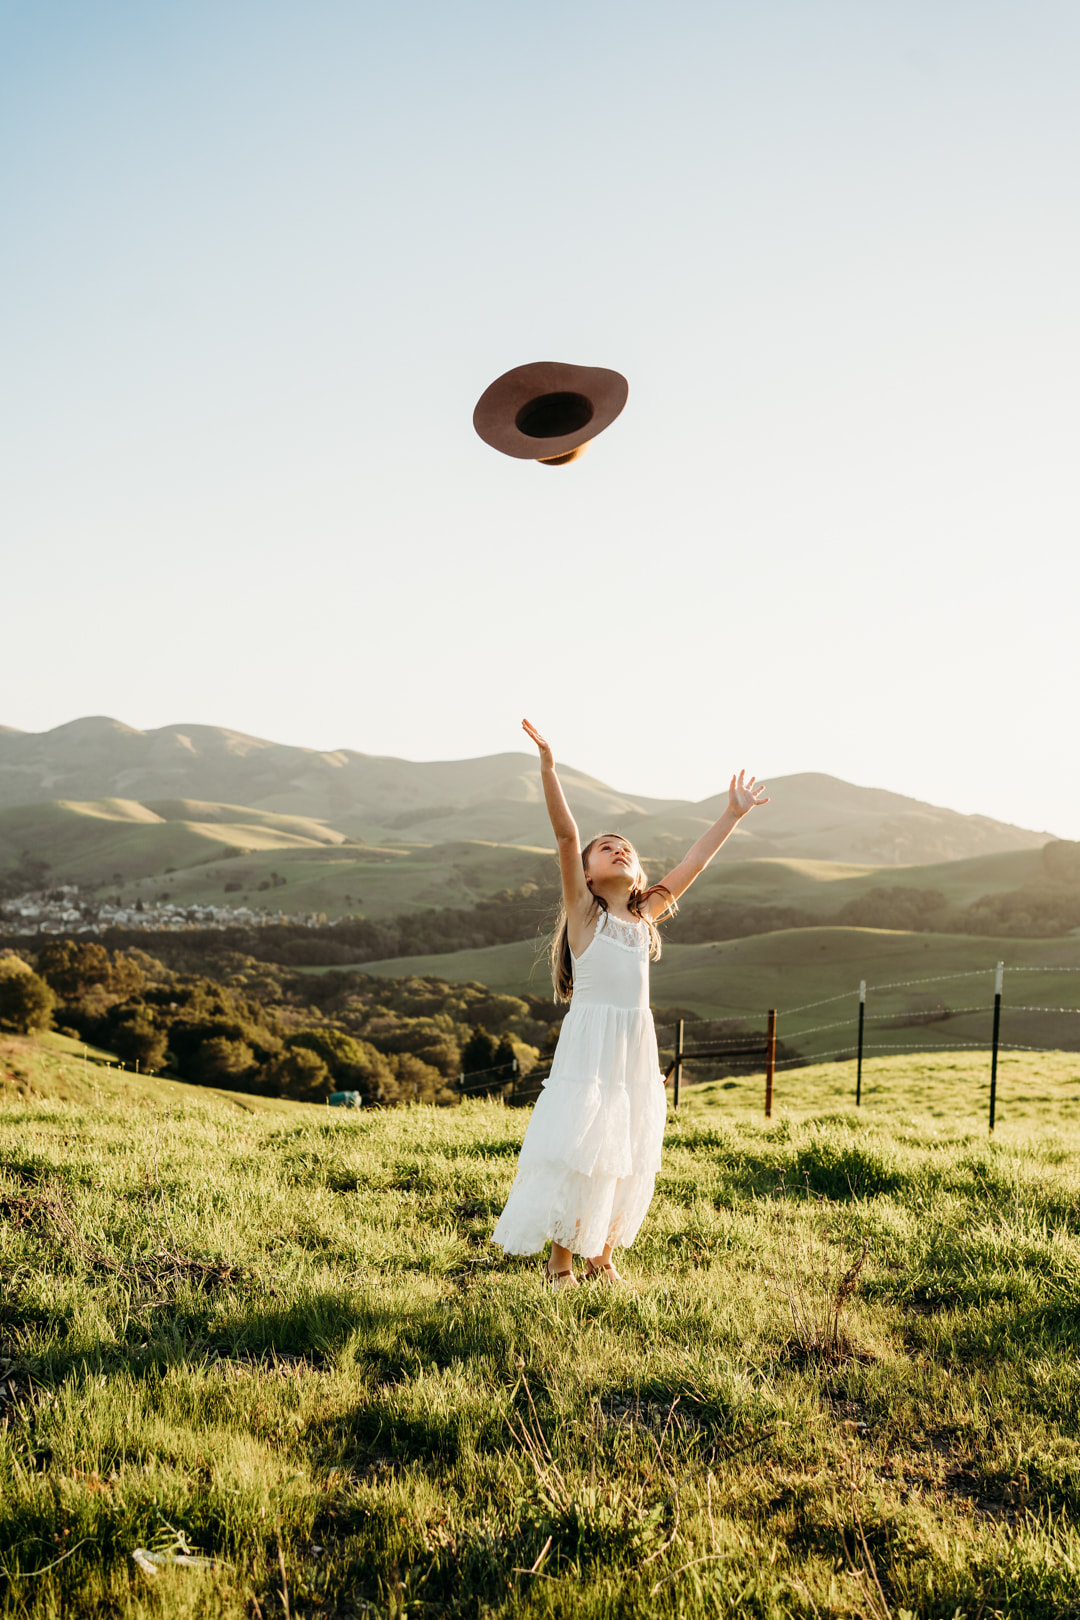 A girl in a white dress throws her hat into the air on a grassy patch of the Danville hills.